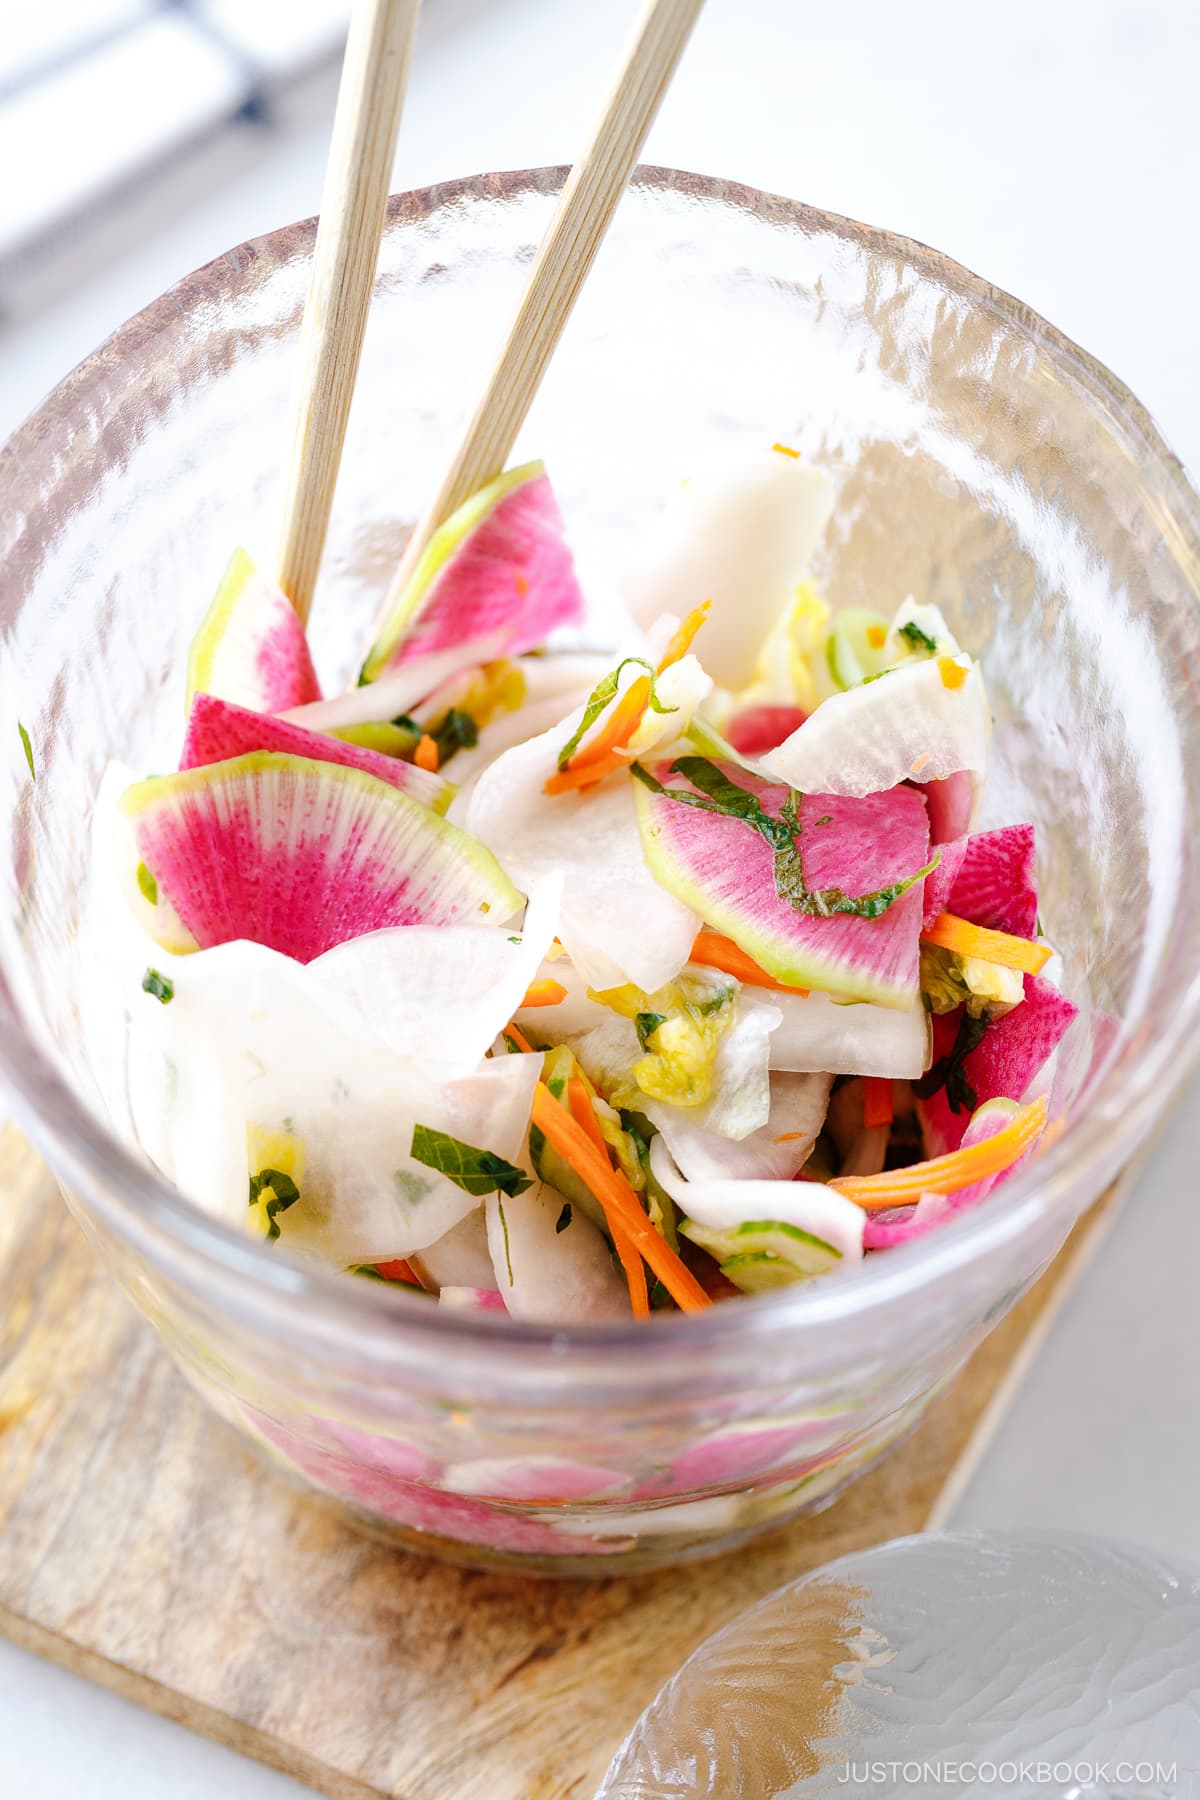 A glass picking jar containing my favorite and go-to Japanese pickles made with colorful vegetables seasoned with salt, kombu, and sugar.